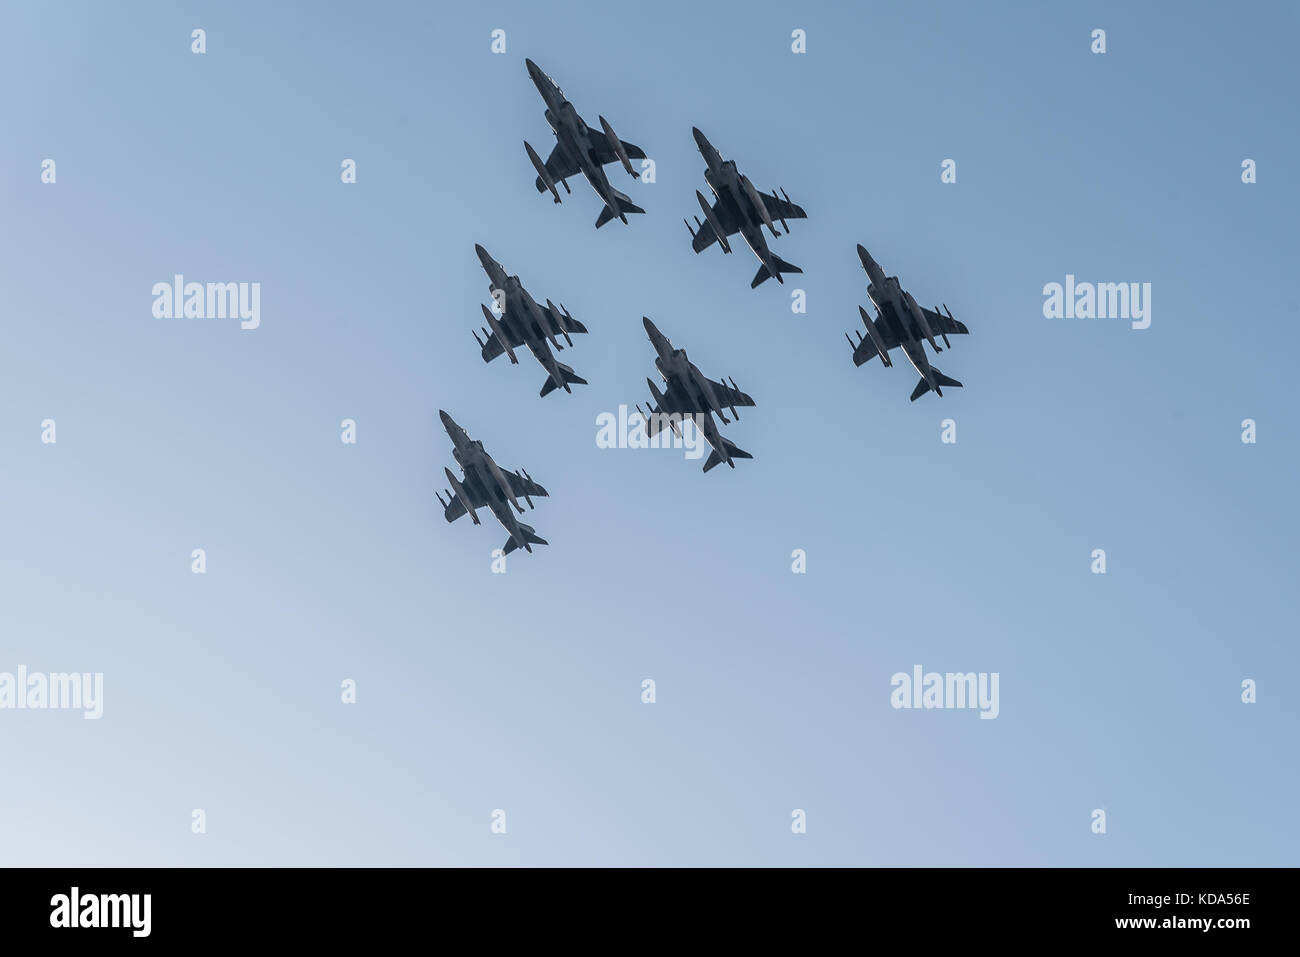 Madrid, Spain - October 12, 2017: Six Harrier EAV-8B jet fighters  flying in Spanish National Day Parade. Several troops take part in the army parade for Spain's National Day. King Felipe VI, Queen Letizia and Spanish Prime Minister Mariano Rajoy presided over the parade. Juan Jimenez/Alamy Live News Stock Photo